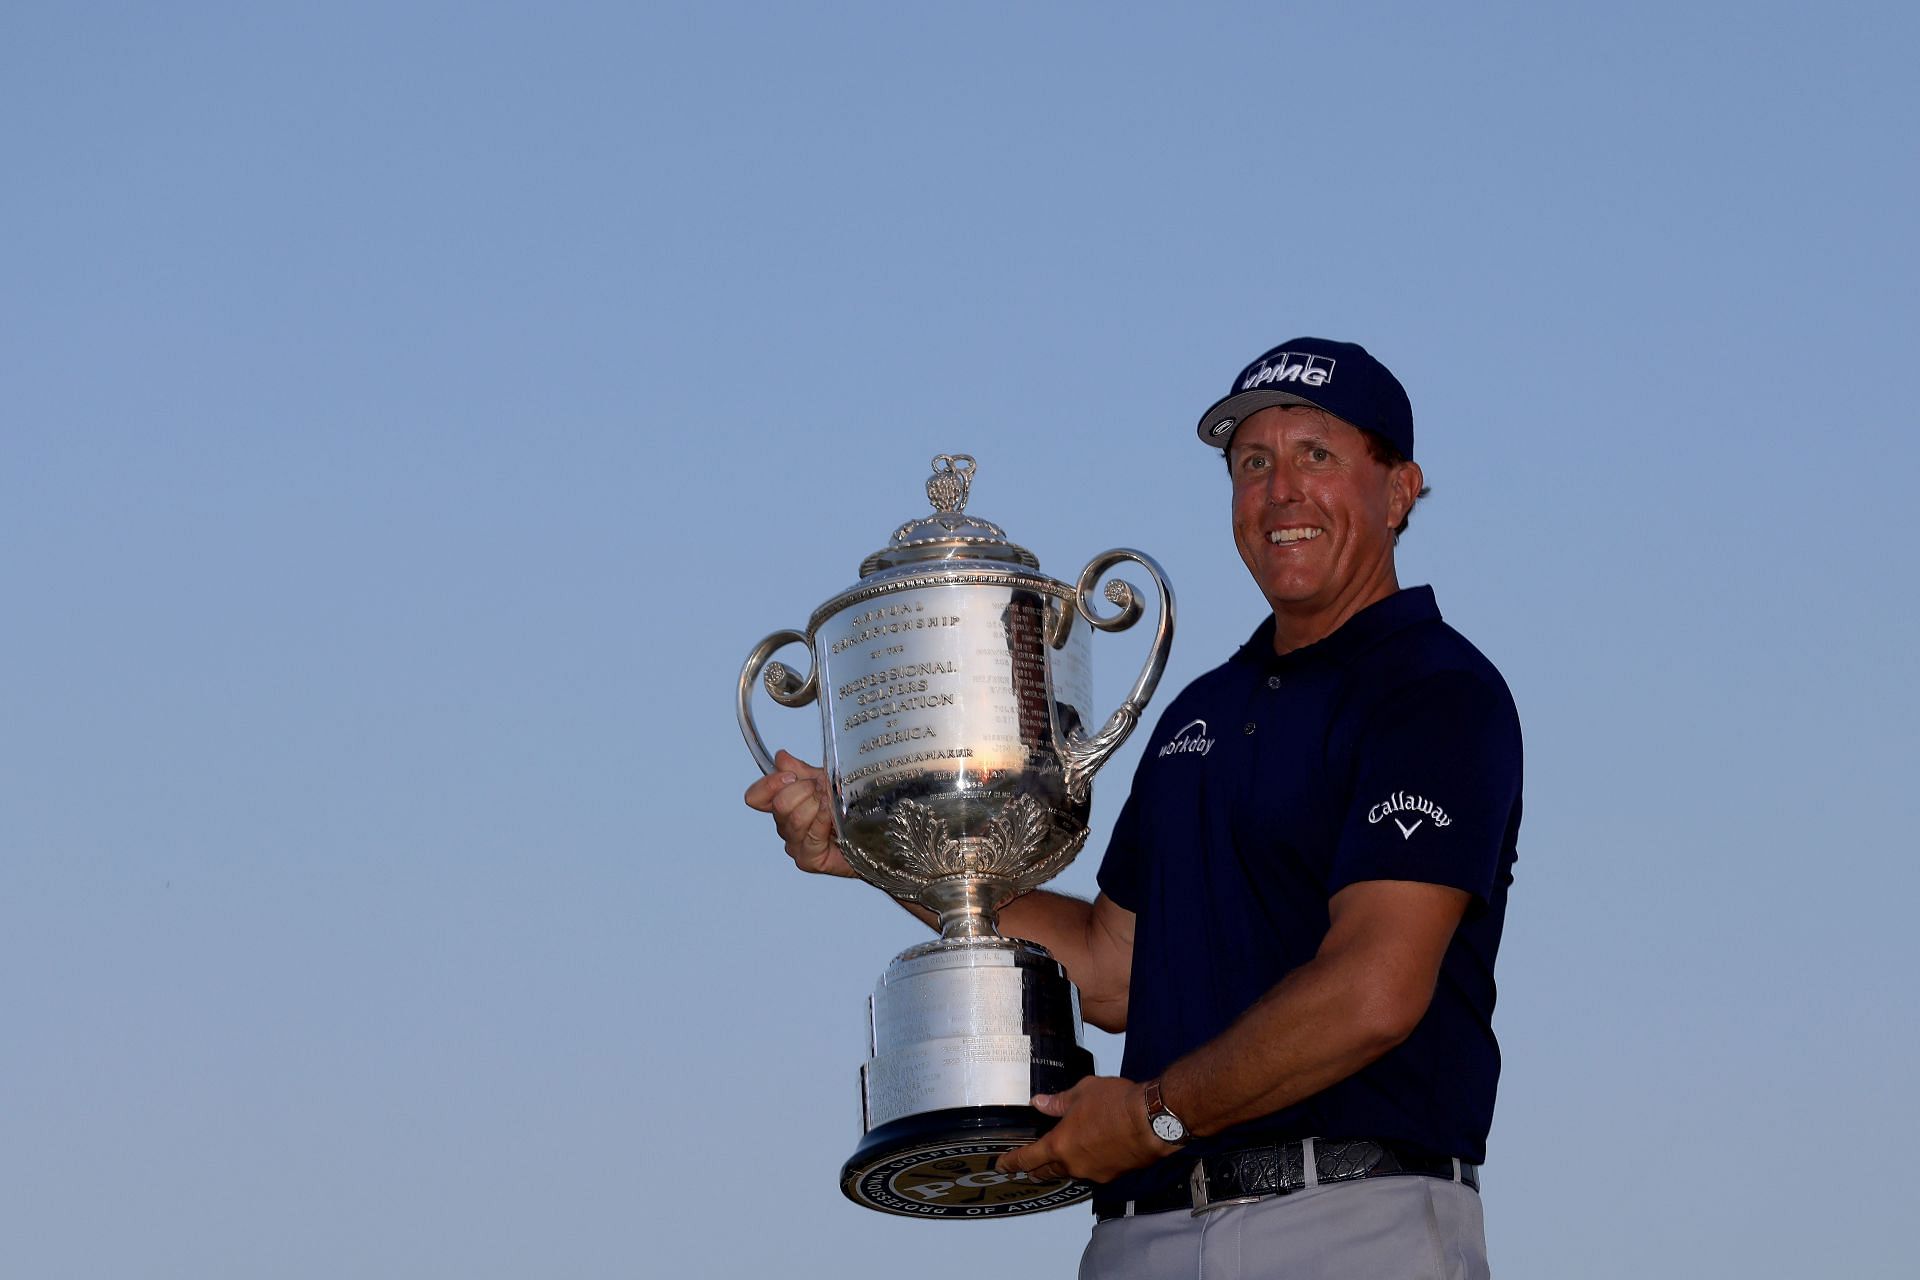 Phil Mickelson with the 2021 PGA Championship trophy - Final Round (via Getty Images)